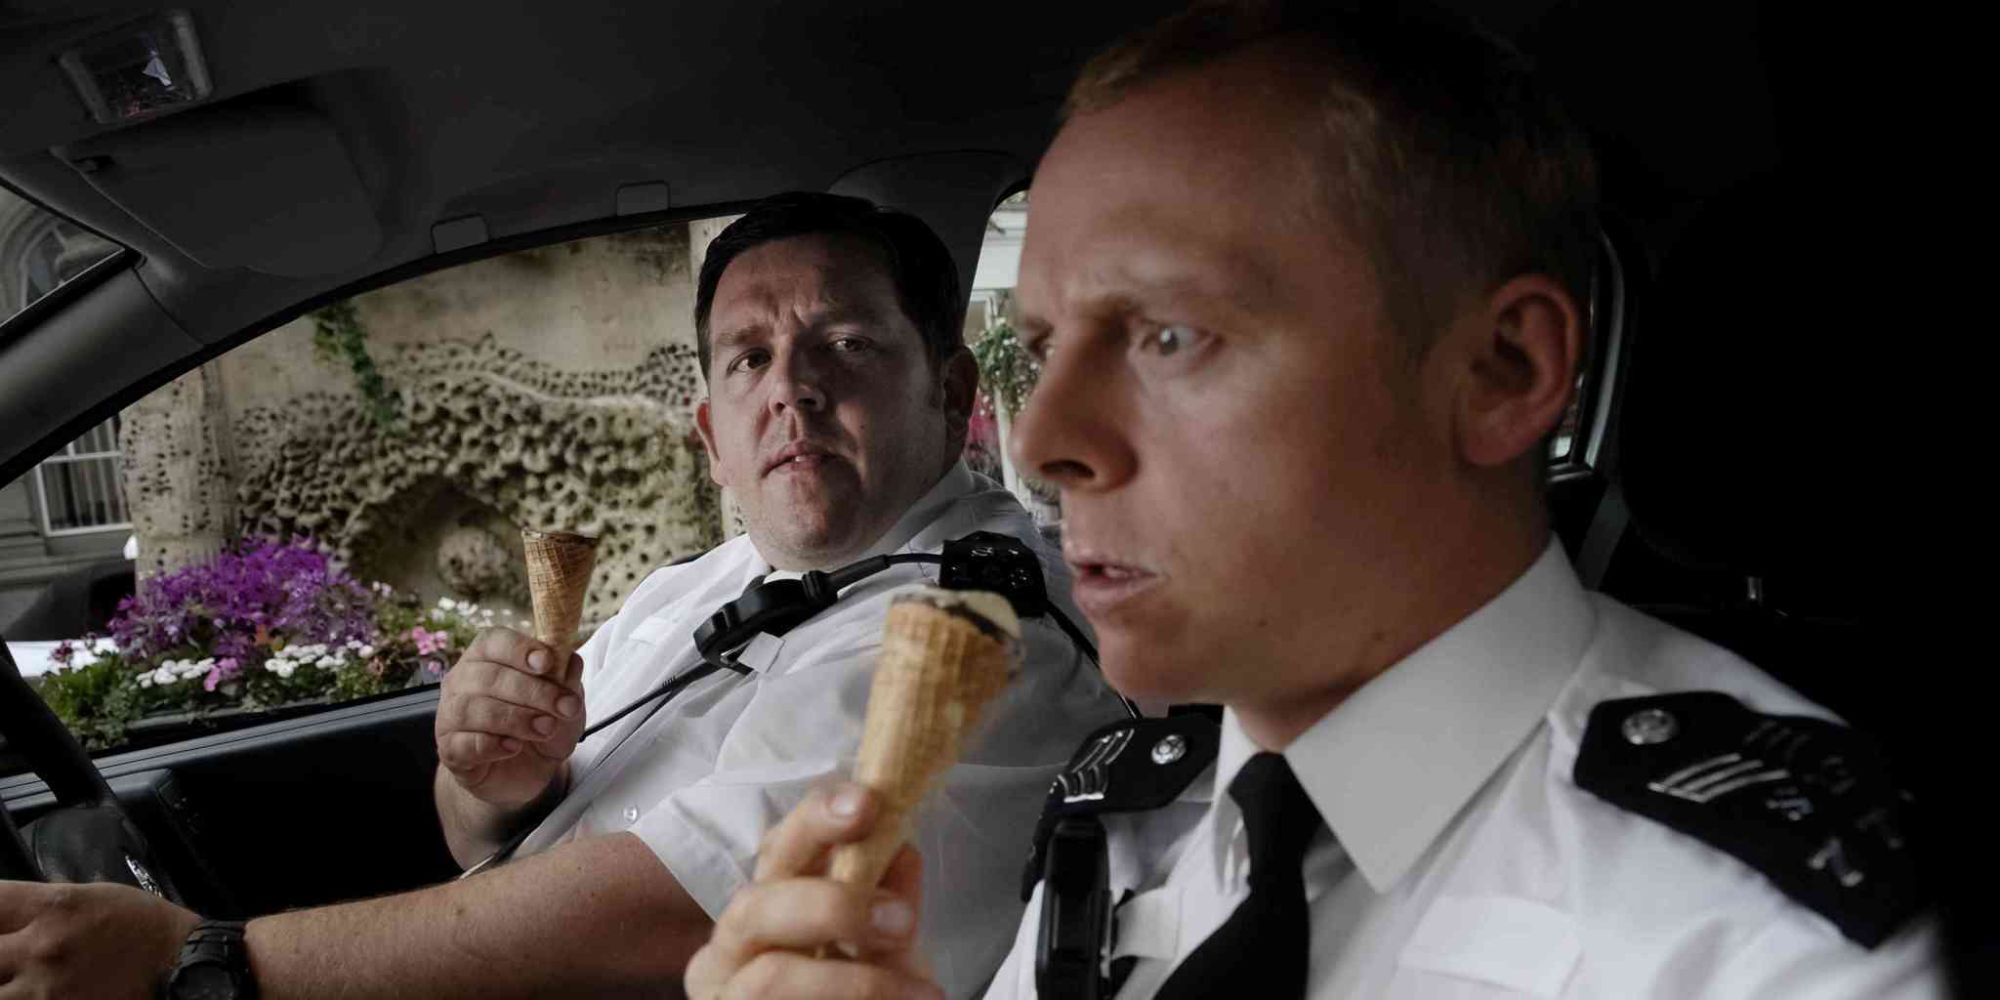 Two police officers sit in a car eating Cornetto ice cream in 'Hot Fuzz'.